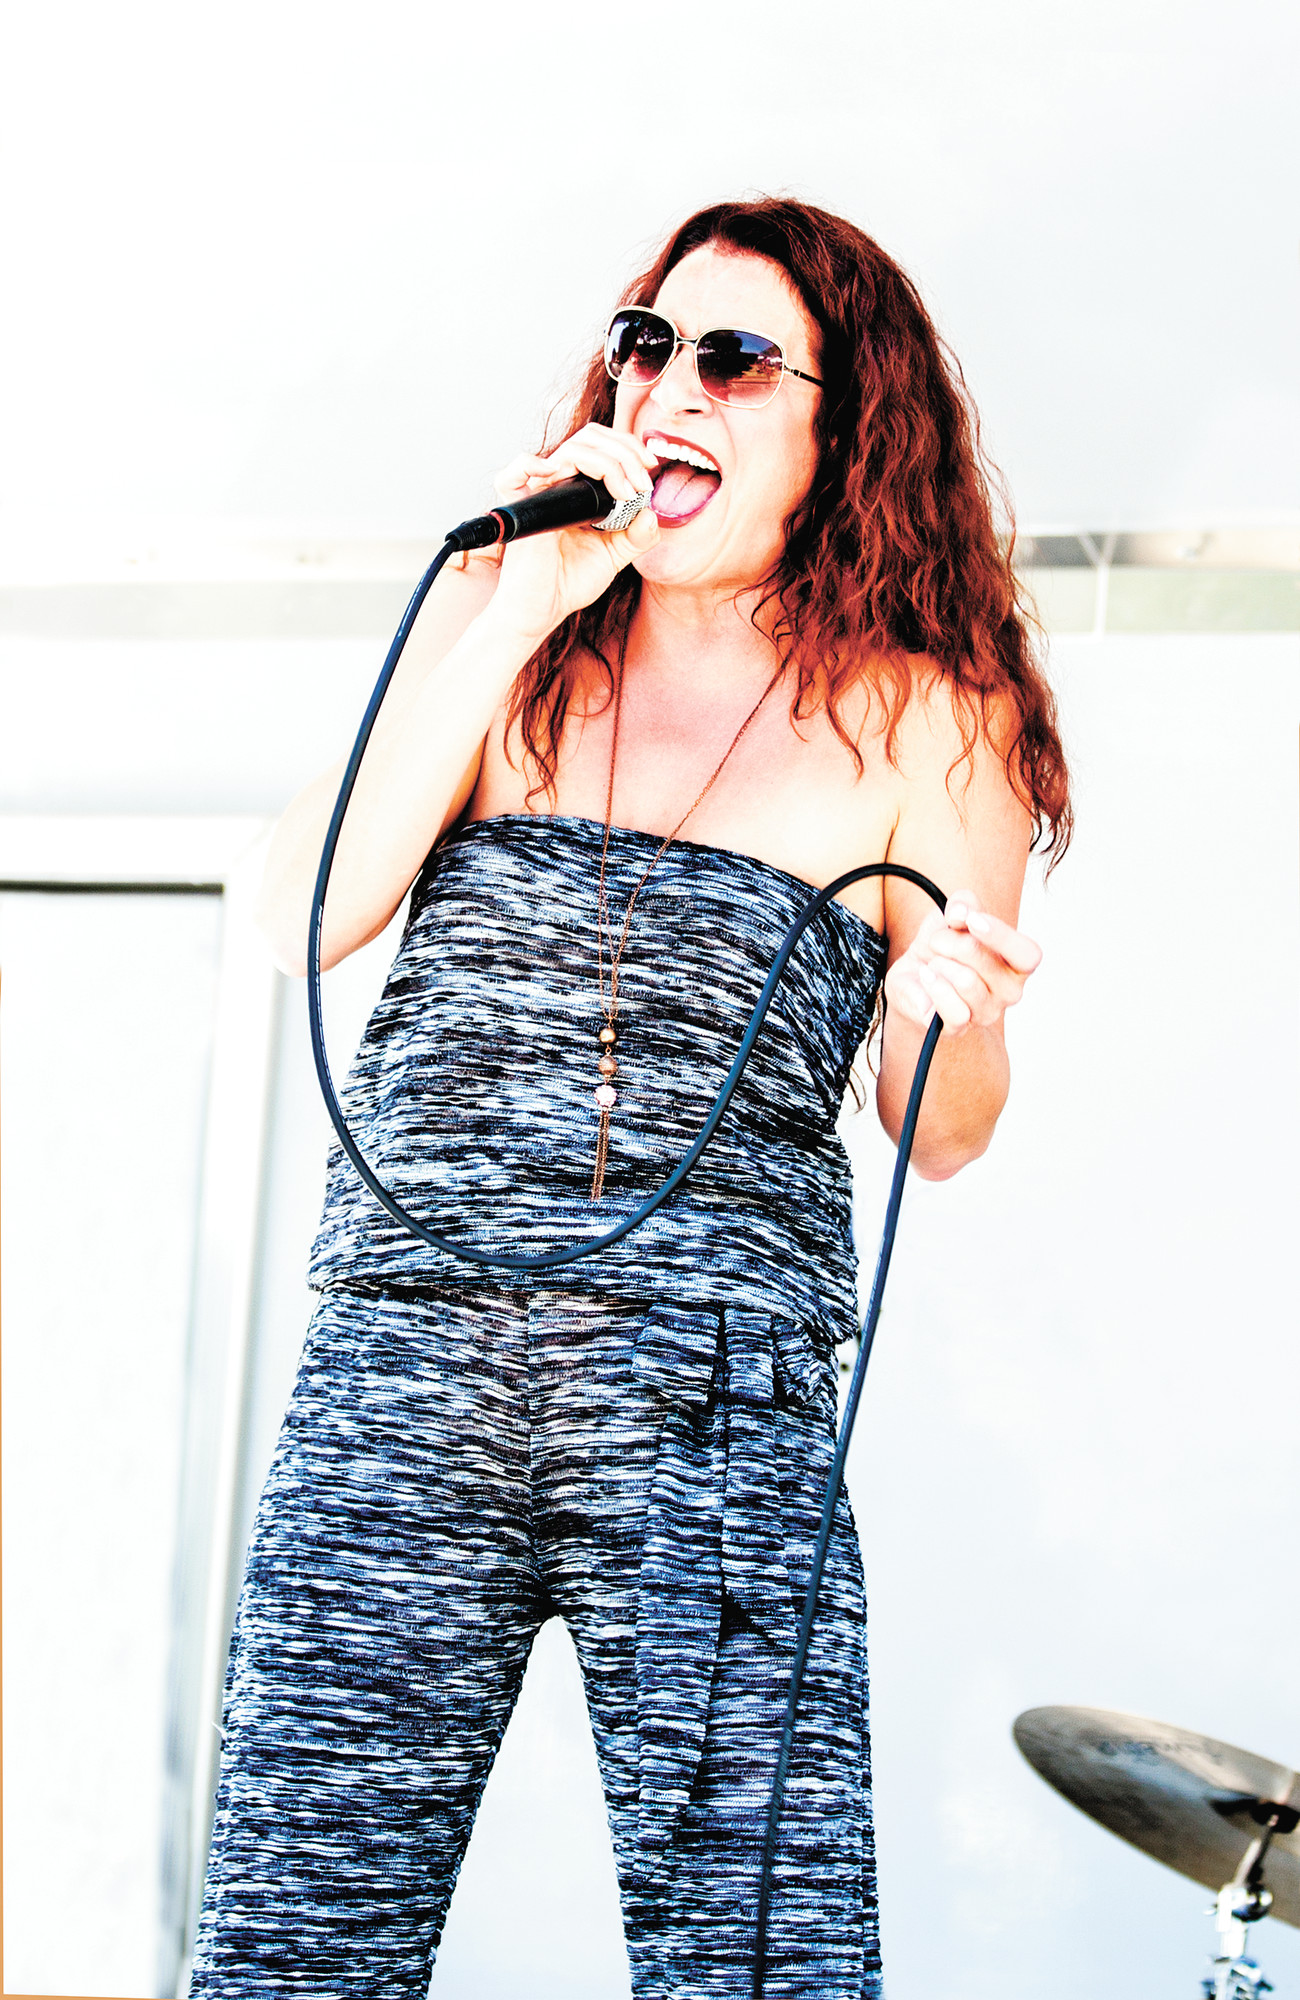 Vocalist Lisa Engellis belted out a cover of Led Zeppelin’s “You Shook Me.”